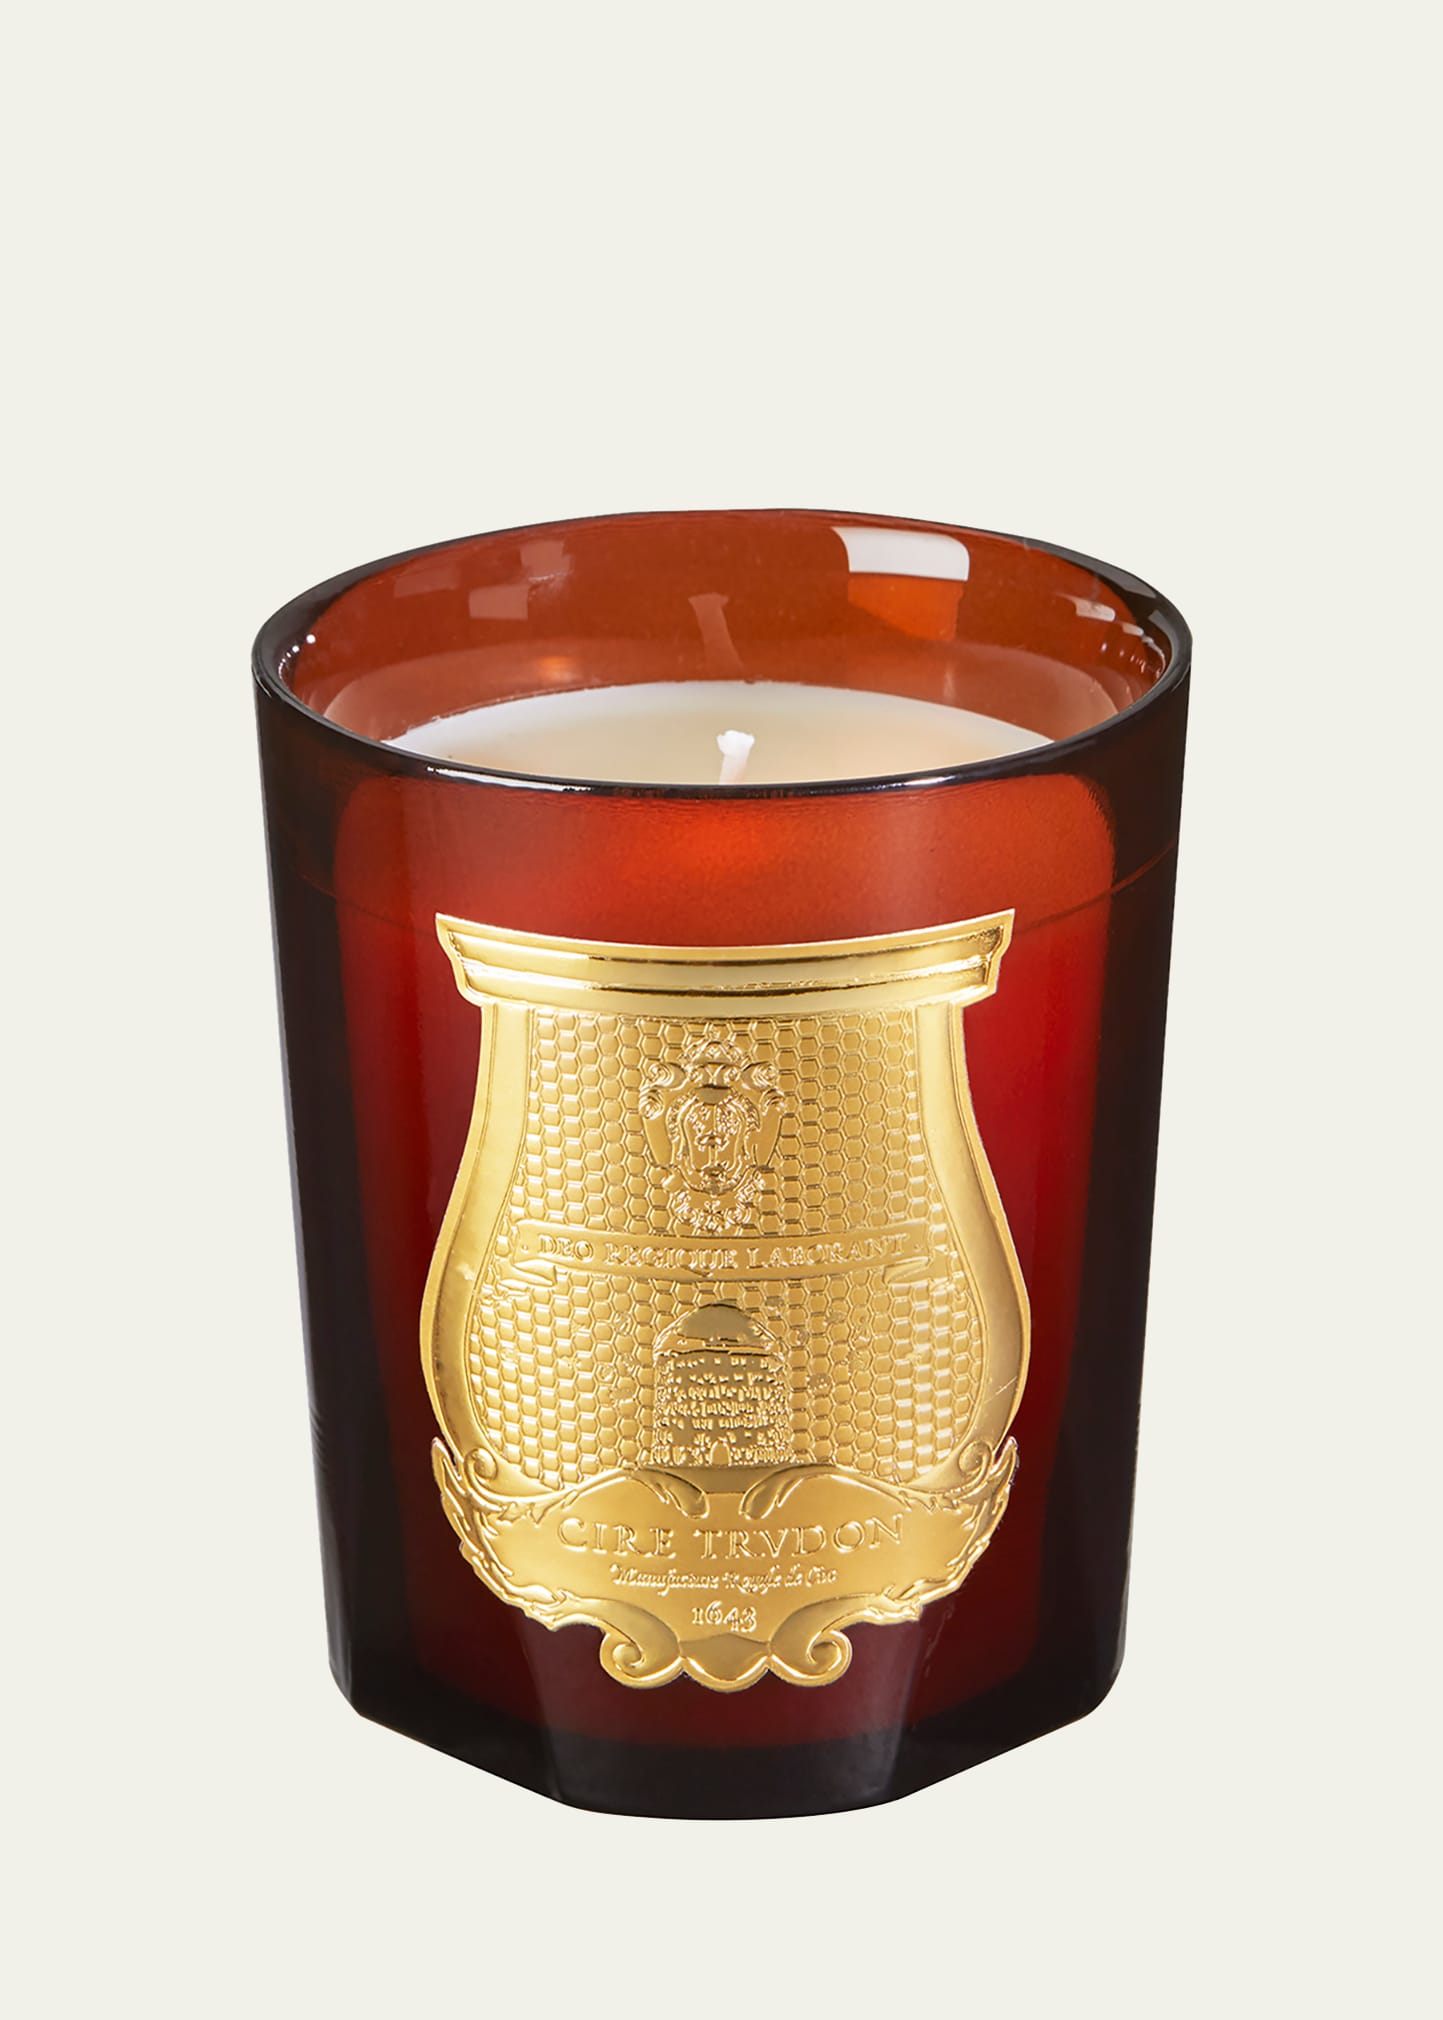 Trudon Cire Classic Candle, Beeswax Absolute